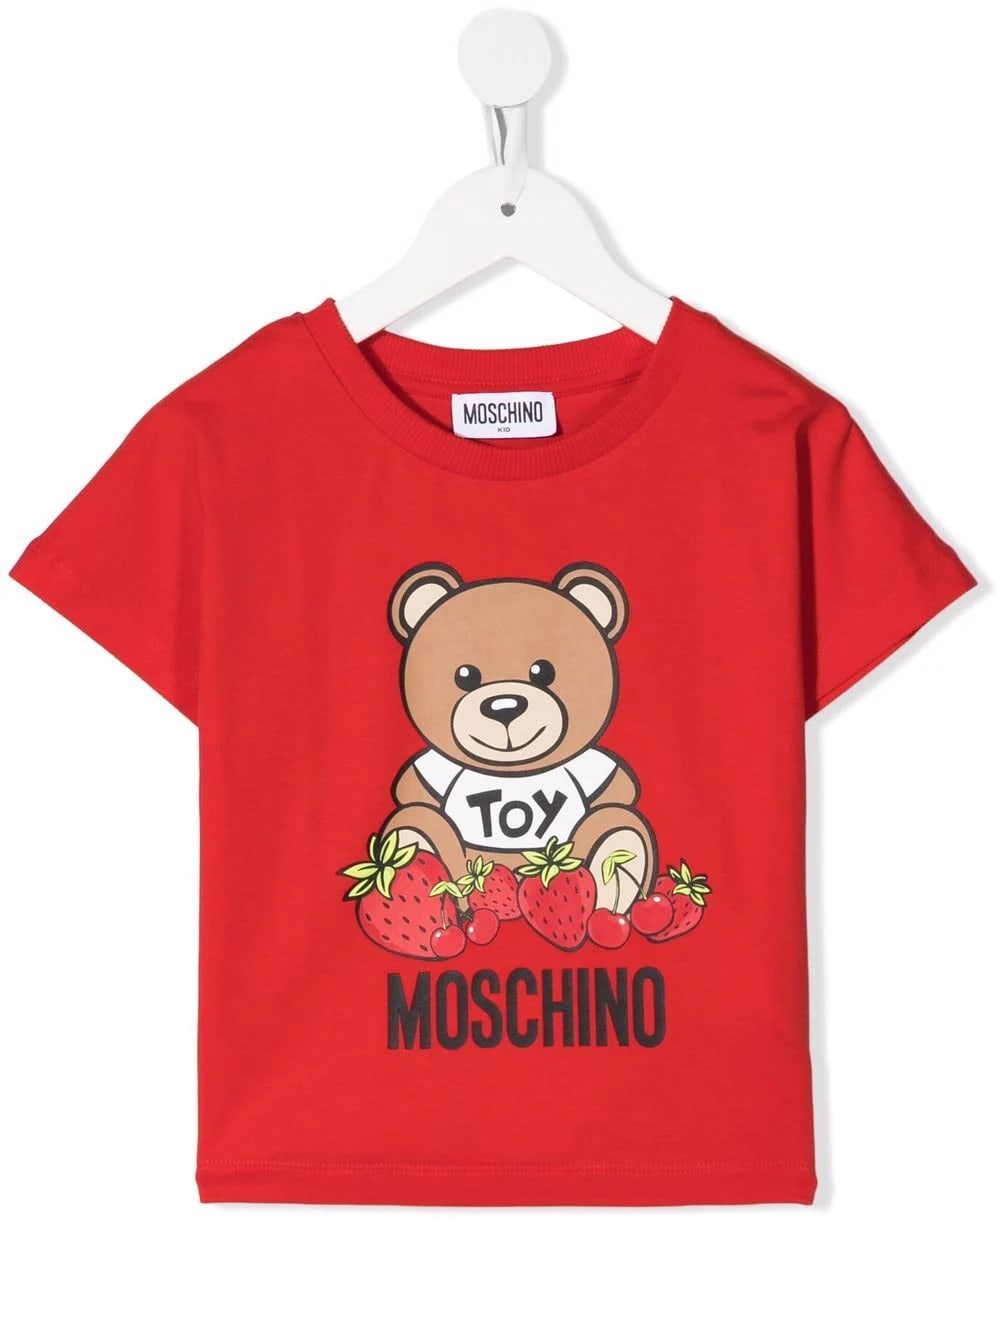 MOSCHINO KIDS RED T-SHIRT WITH STRAWBERRY TEDDY BEAR PRINT